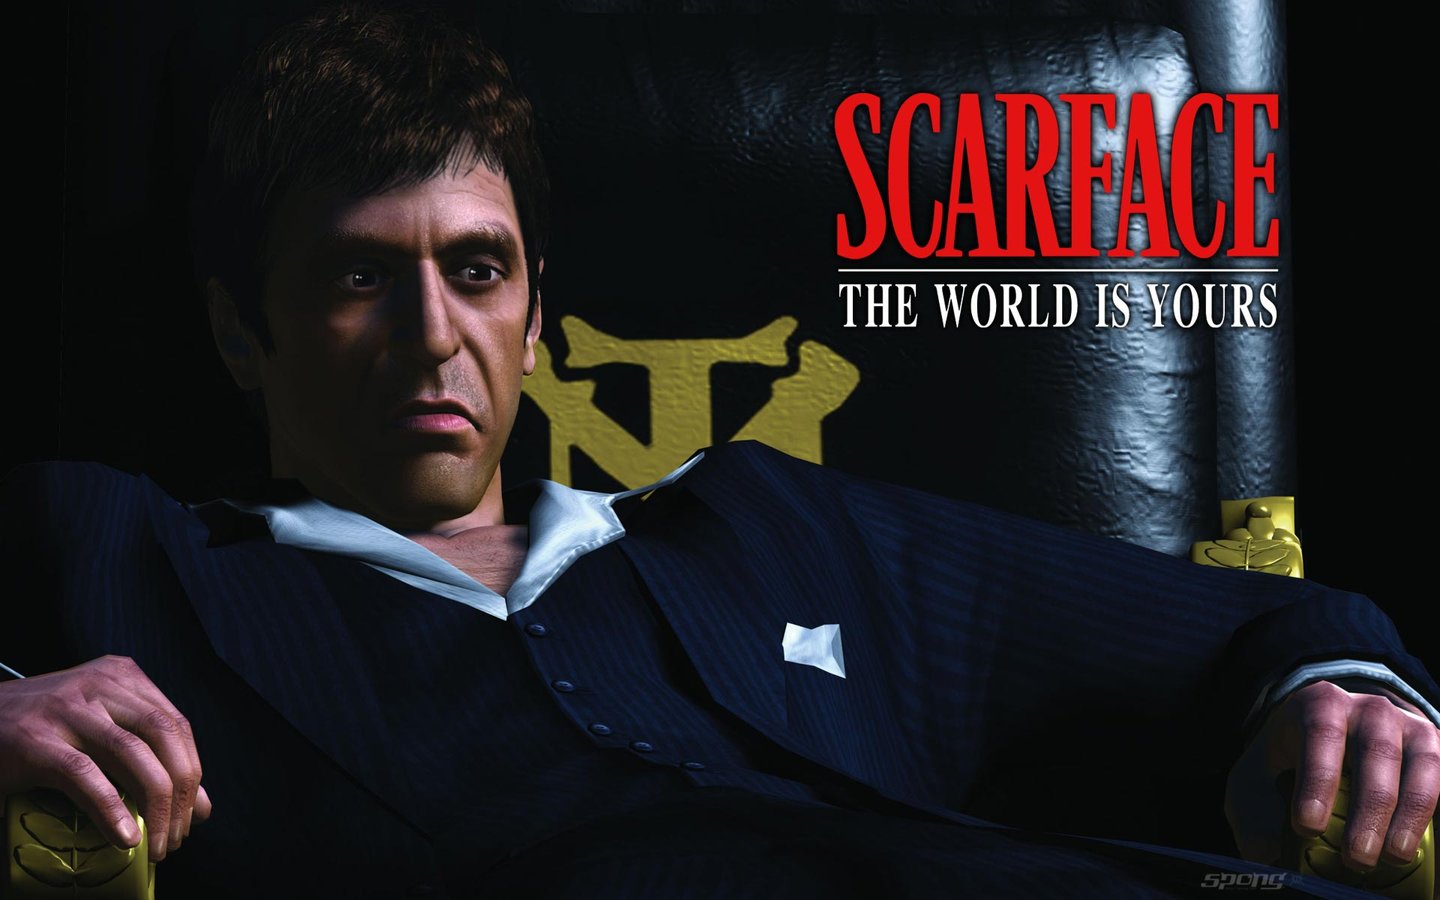 Scarface: The World is Yours - Wii Wallpaper